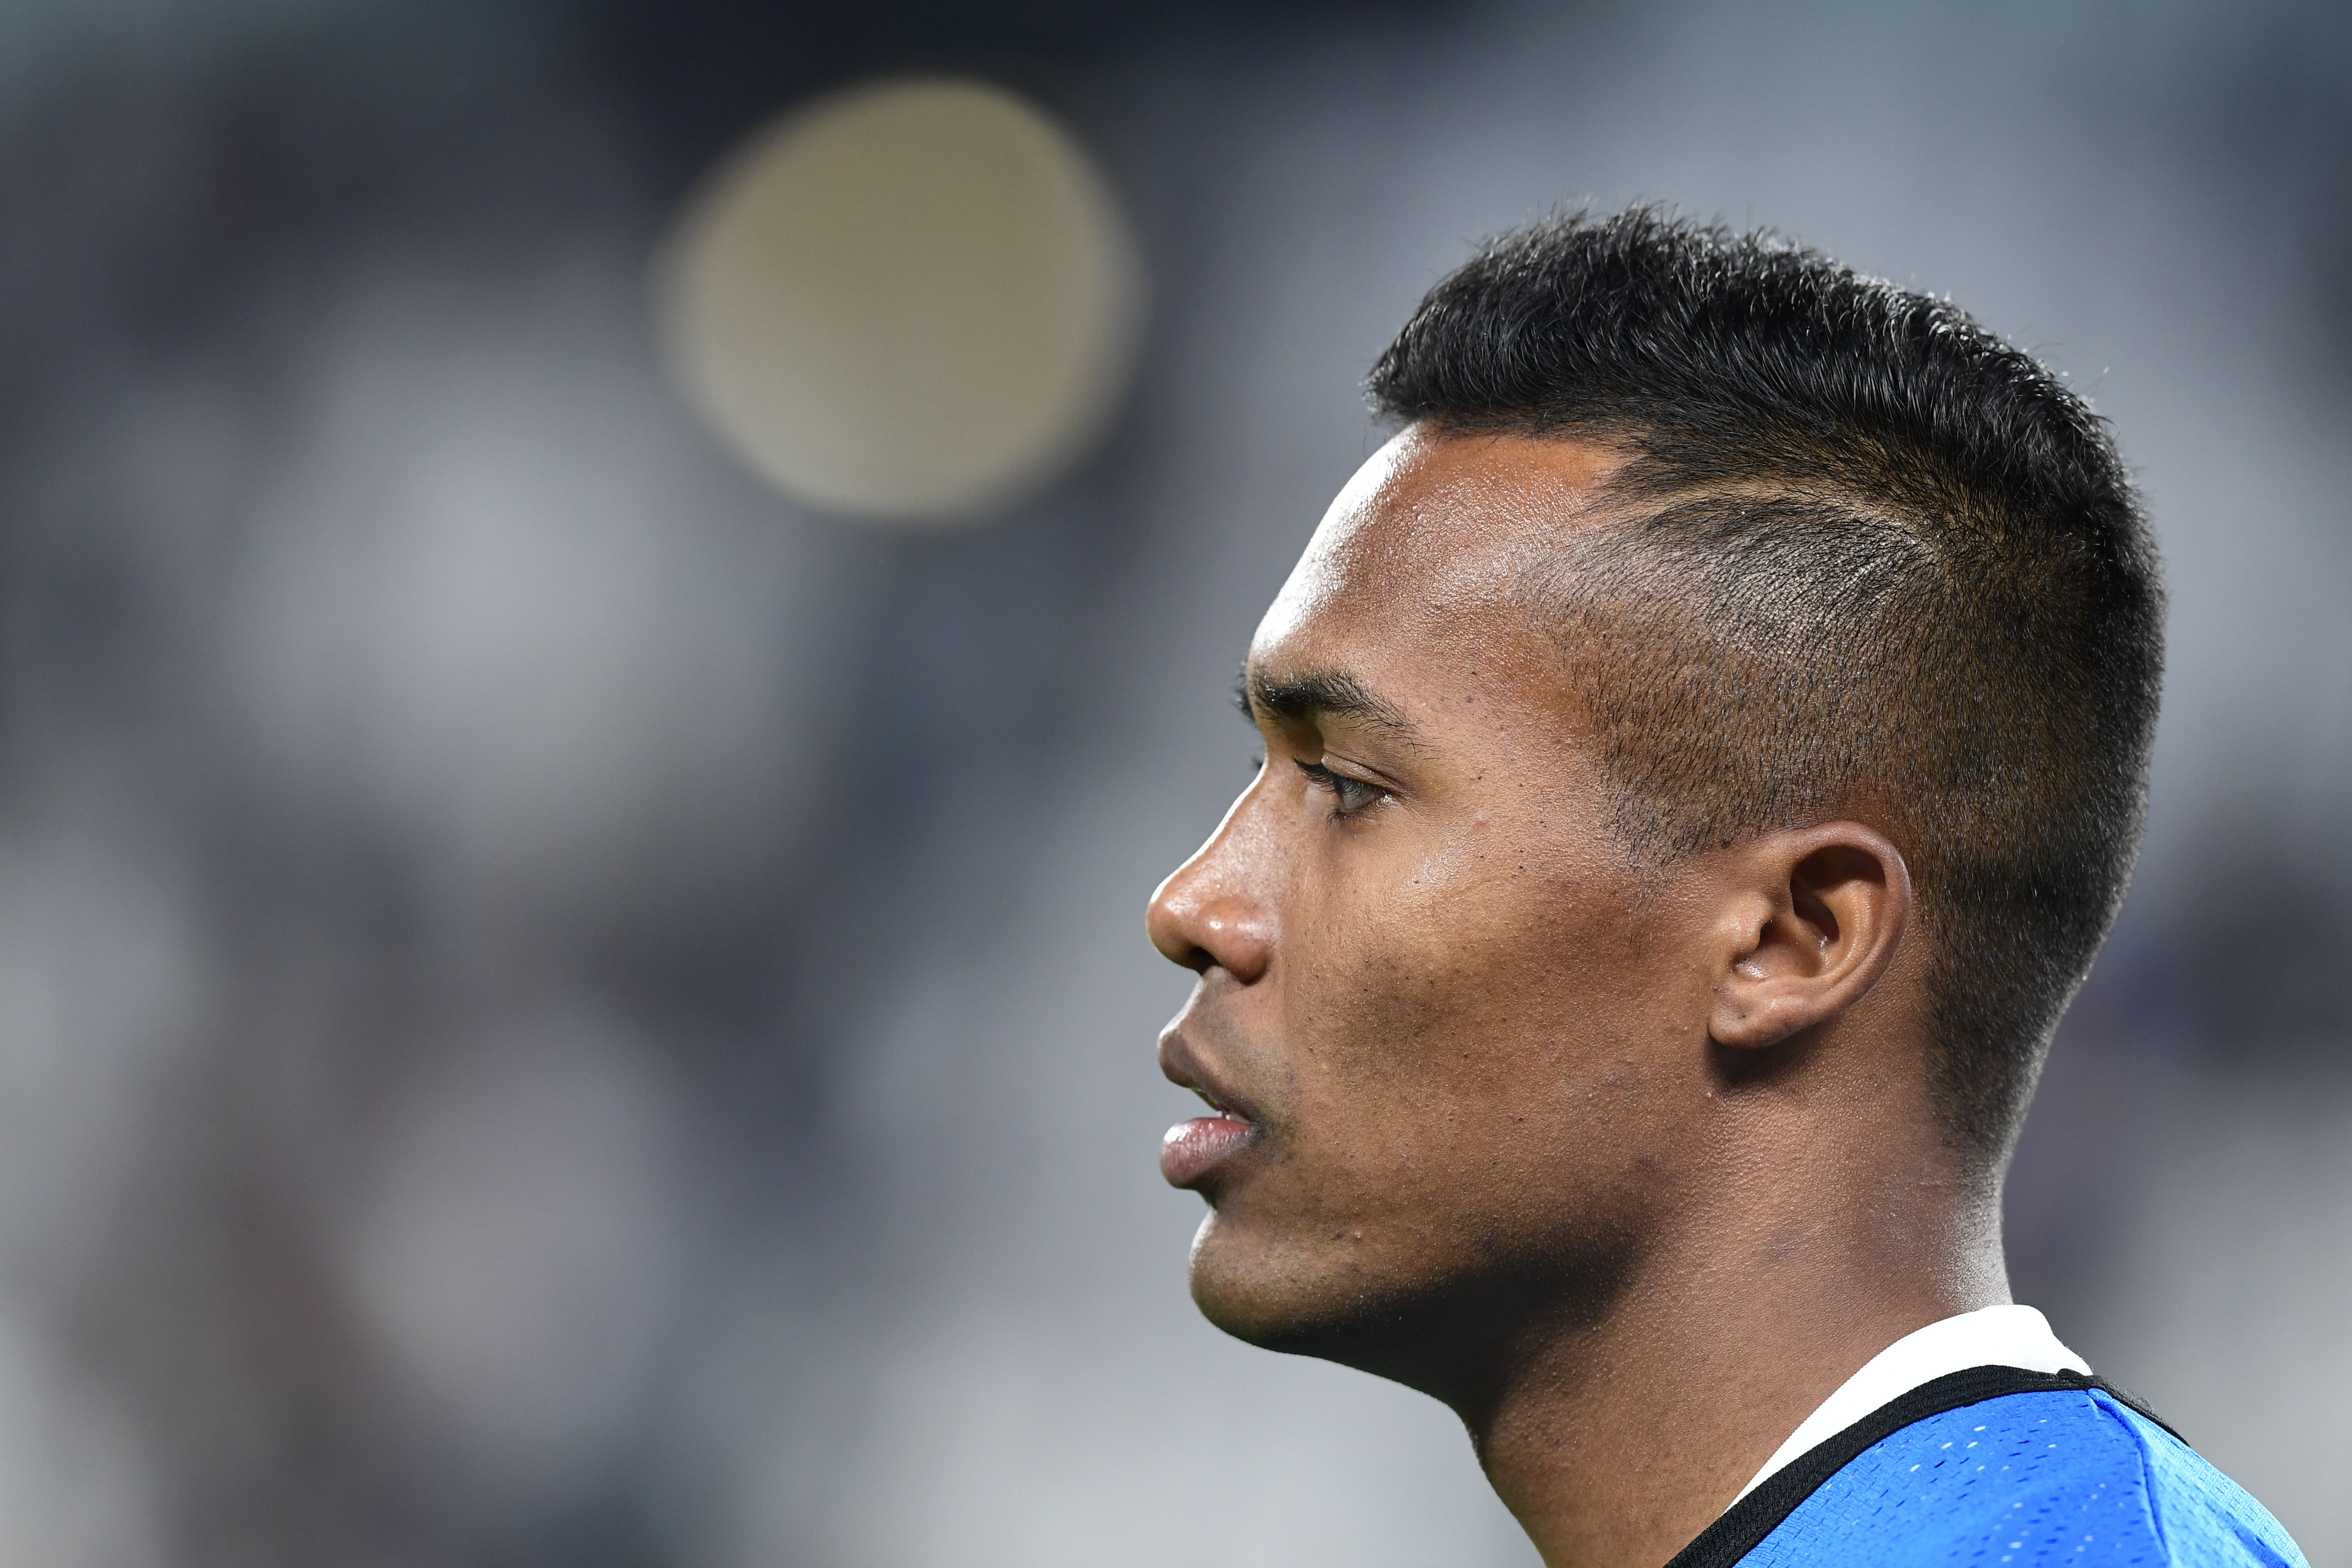 Juventus' defender from Brazil Alex Sandro warms up before the UEFA Champion's League Group D football match Juventus vs Olympiacos on September 27, 2017 at the Juventus stadium in Turin.  / AFP PHOTO / Miguel MEDINA        (Photo credit should read MIGUEL MEDINA/AFP/Getty Images)